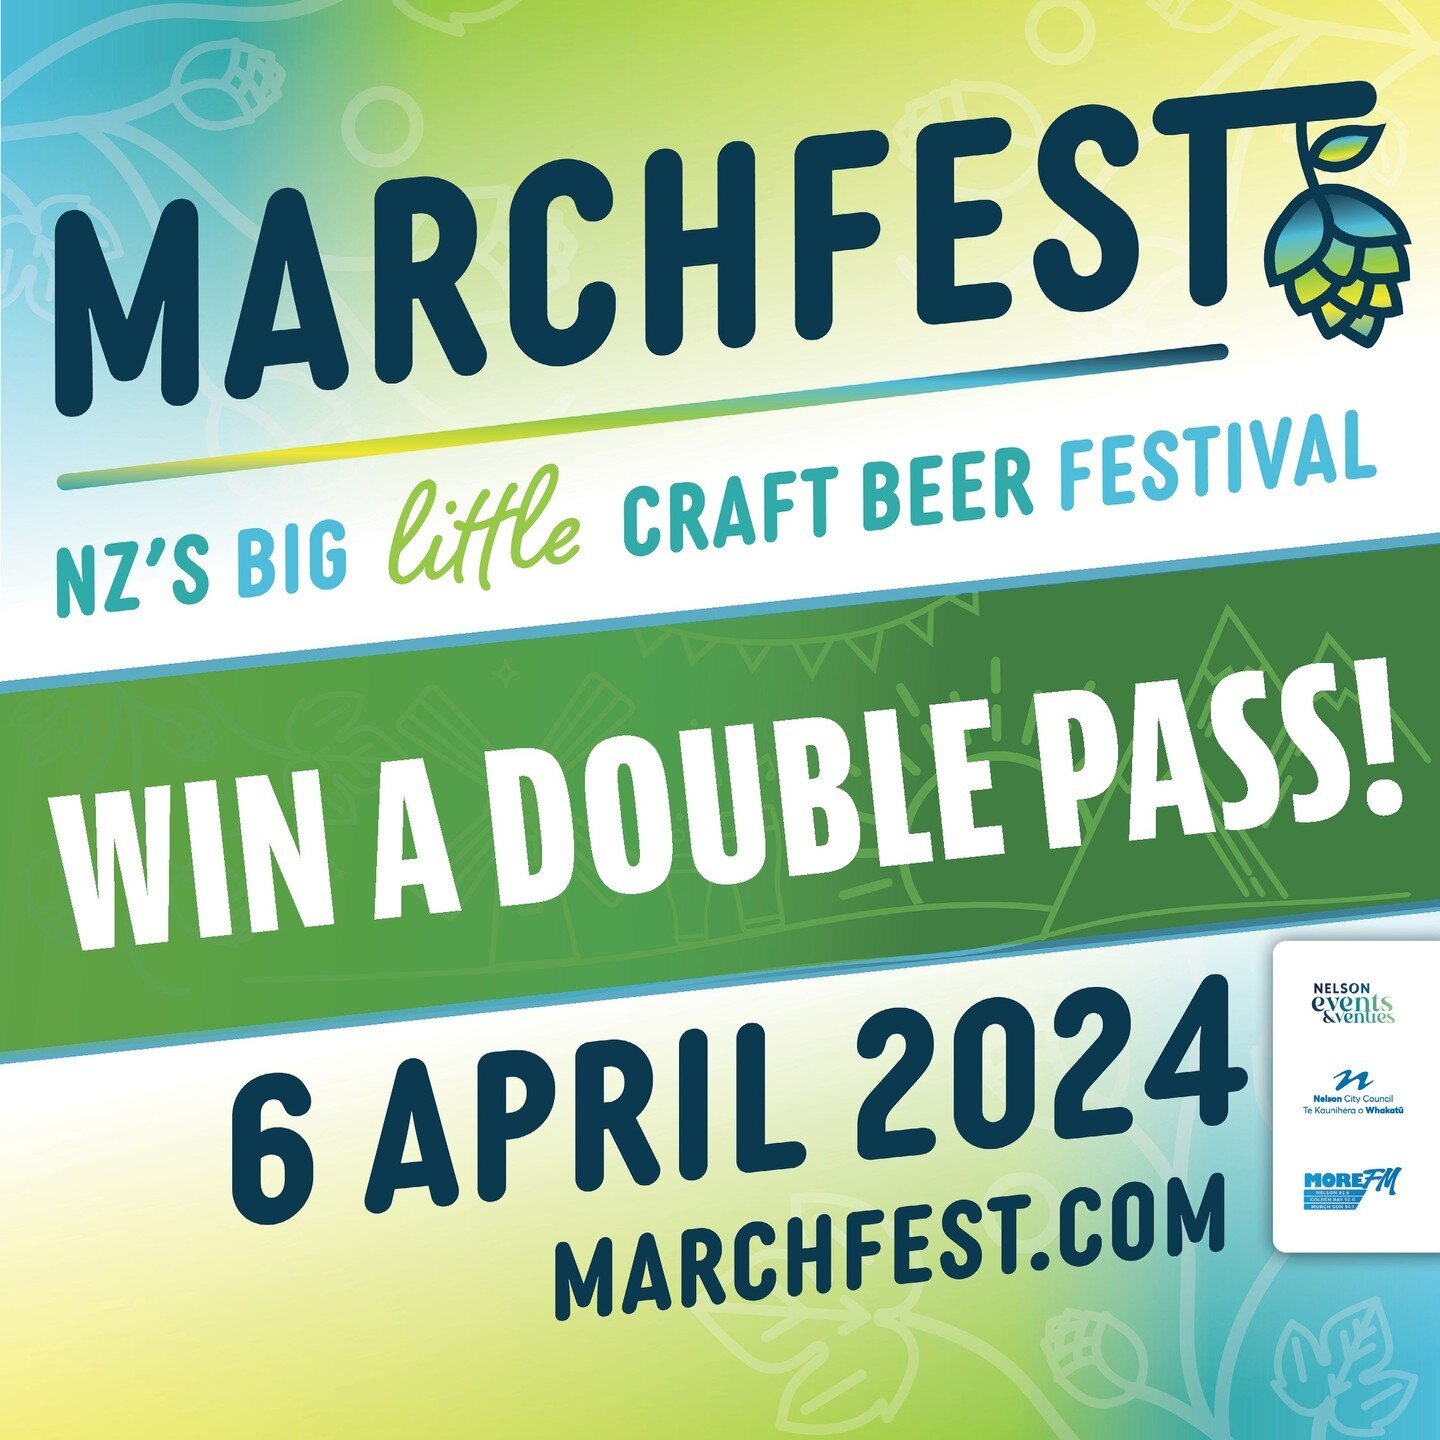 #WIN! Keen to go to @MarchfestNZ this Saturday, 6th April? We've got a double pass to giveaway!

Just tag who you&rsquo;d take and make sure you're both following our page. Easy.

An epic day celebrating (and drinking) craft beer at Founders Park in 